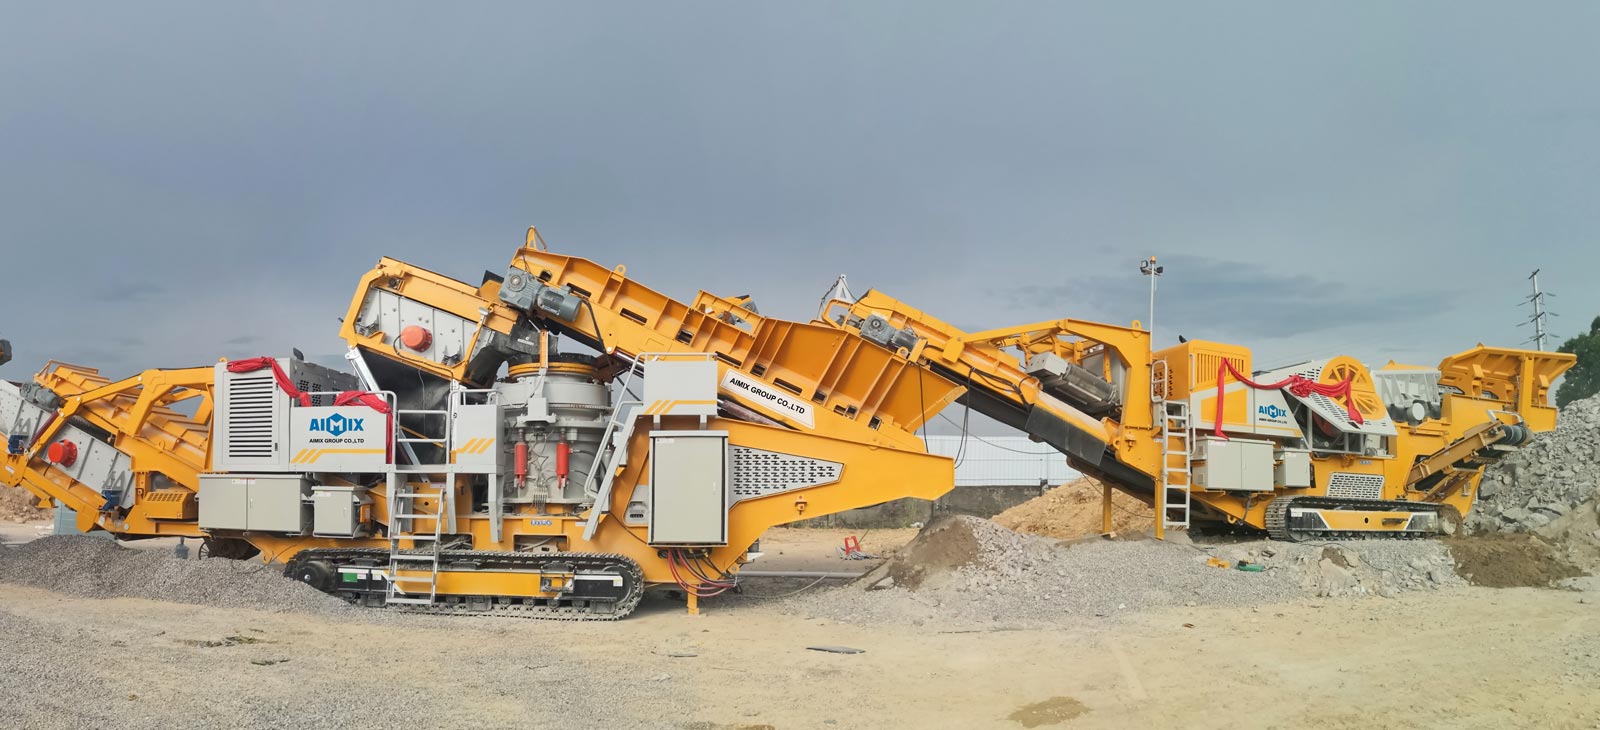 Gravel and Sand crusher for sale in the Philippines AImix Group